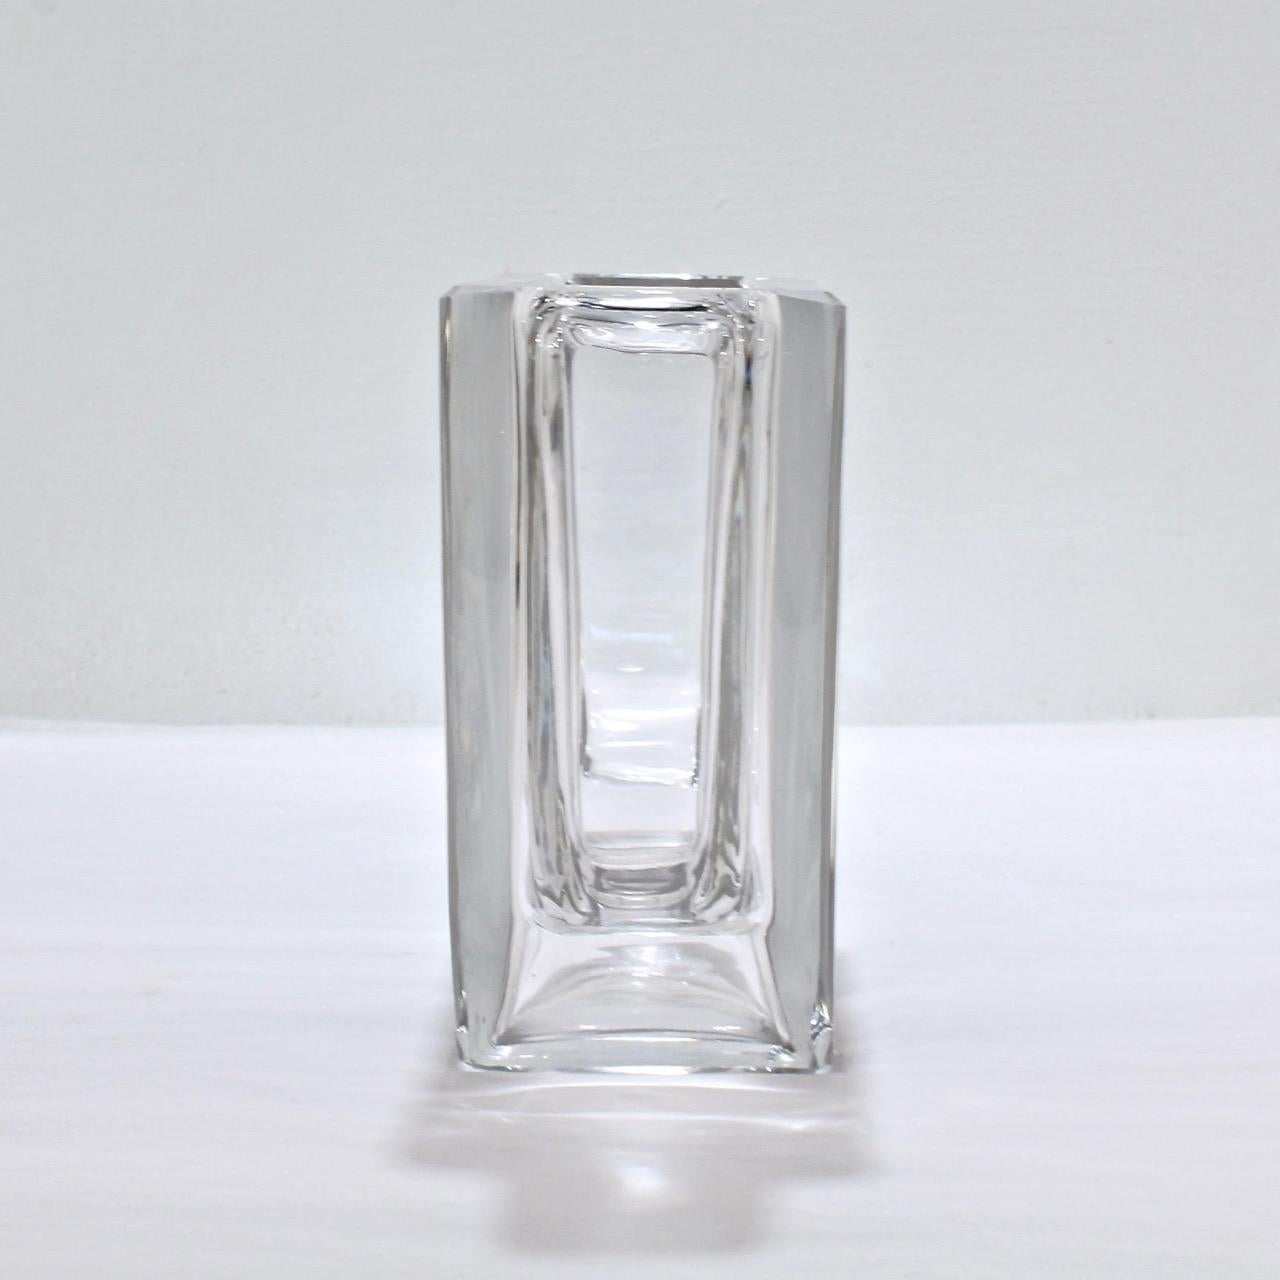 Art Deco Baccarat Twin-Handled Glass or Crystal Vase In Good Condition For Sale In Philadelphia, PA